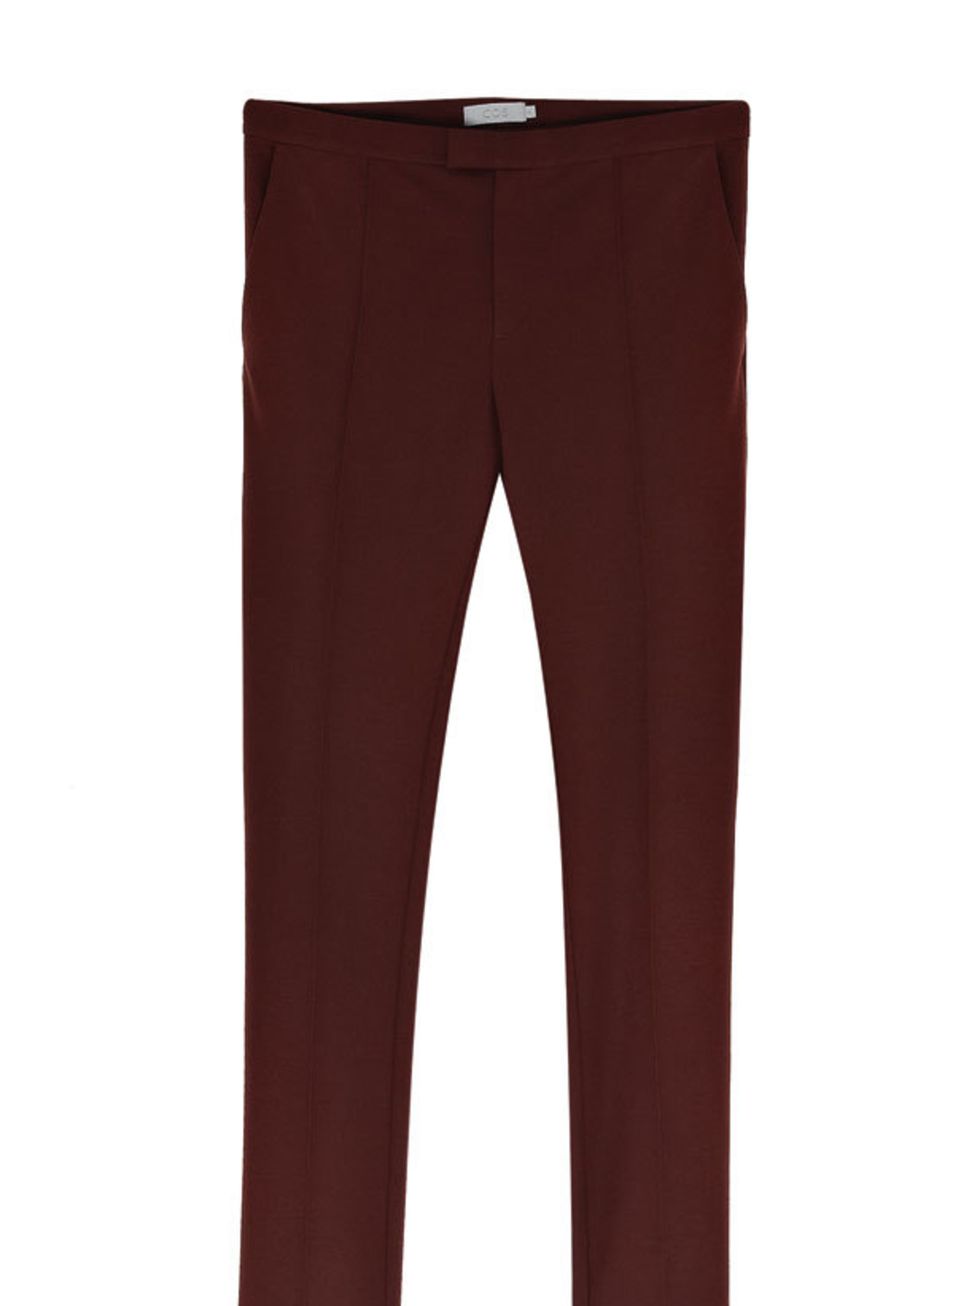 <p>Cos burgundy trousers, £59, for stockists call 0207 478 0400</p>